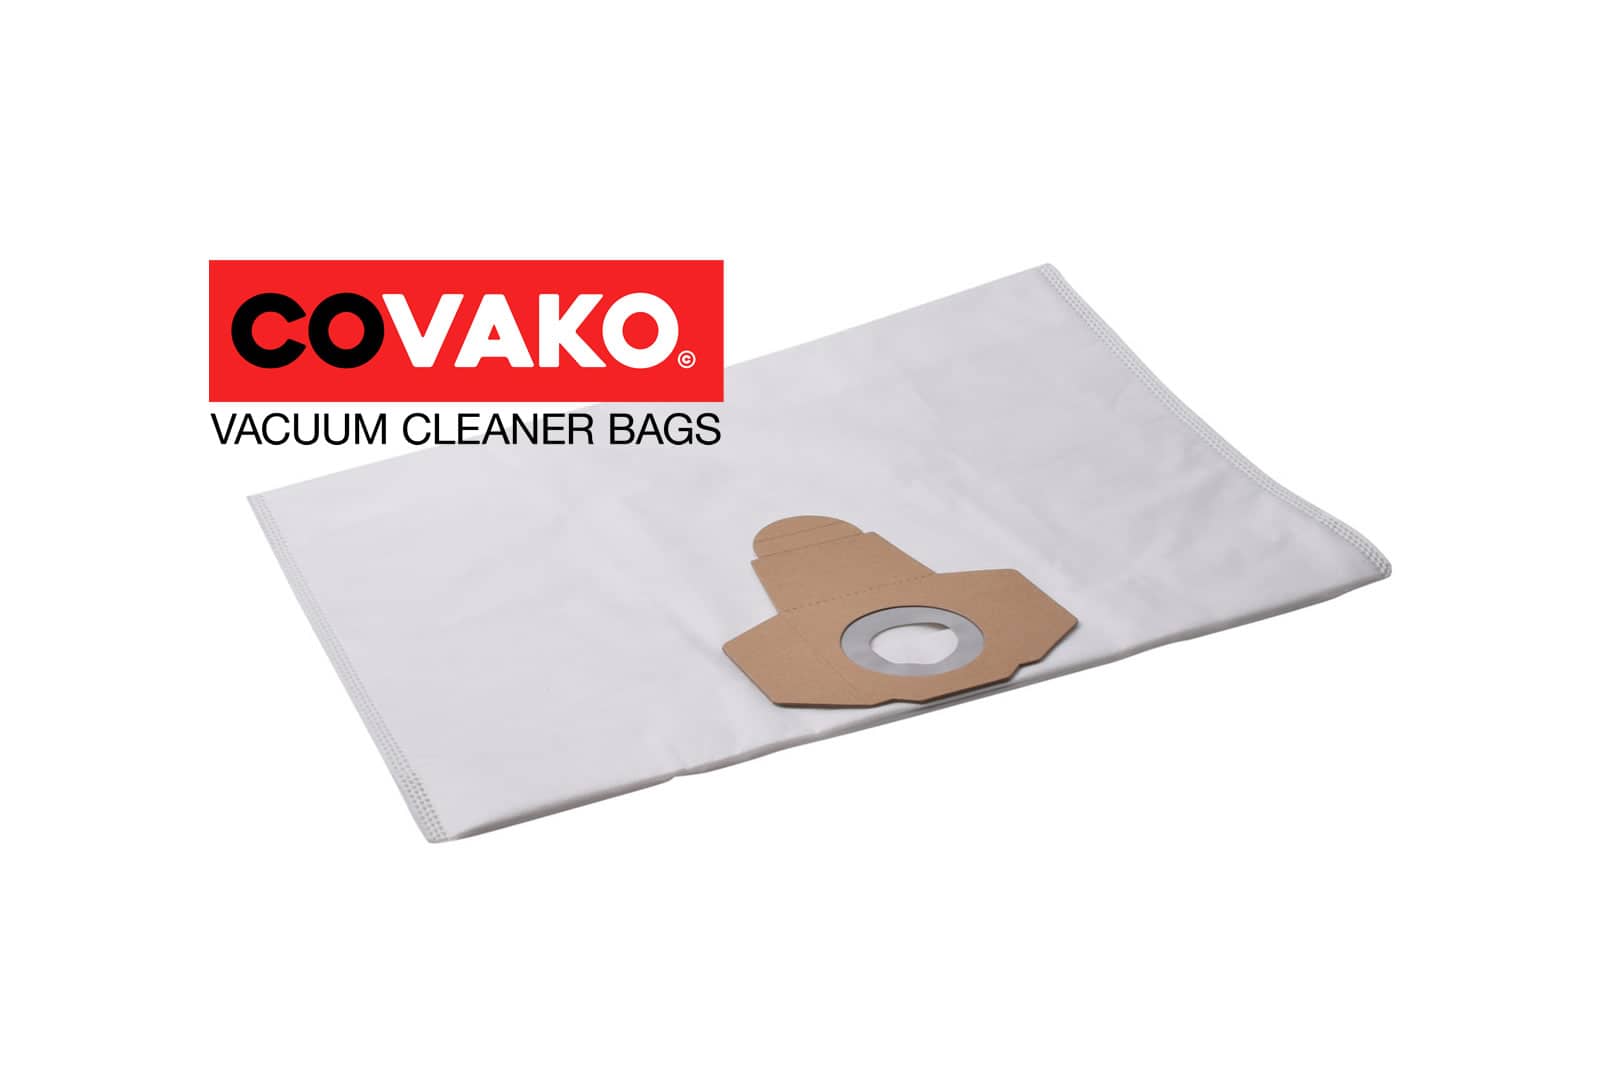 ewt Boxter 15 P / Synthesis - ewt vacuum cleaner bags